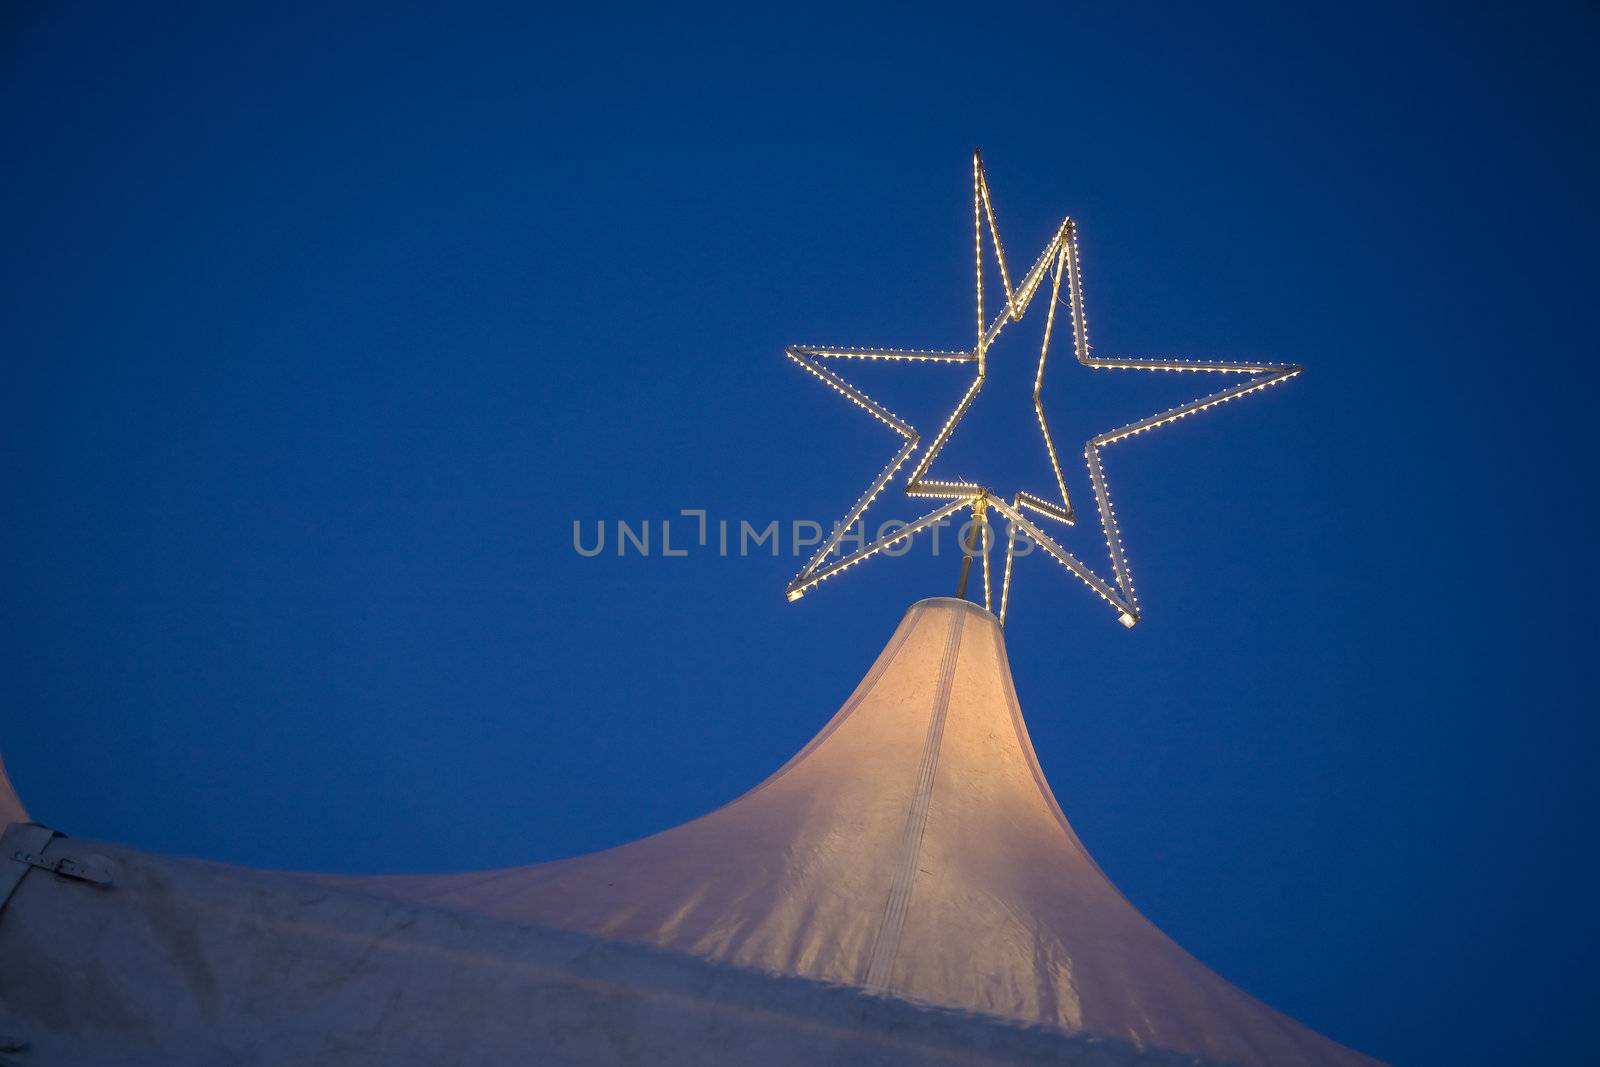 Top of a tent with star - Christmas Market, Hamburg - Germany.